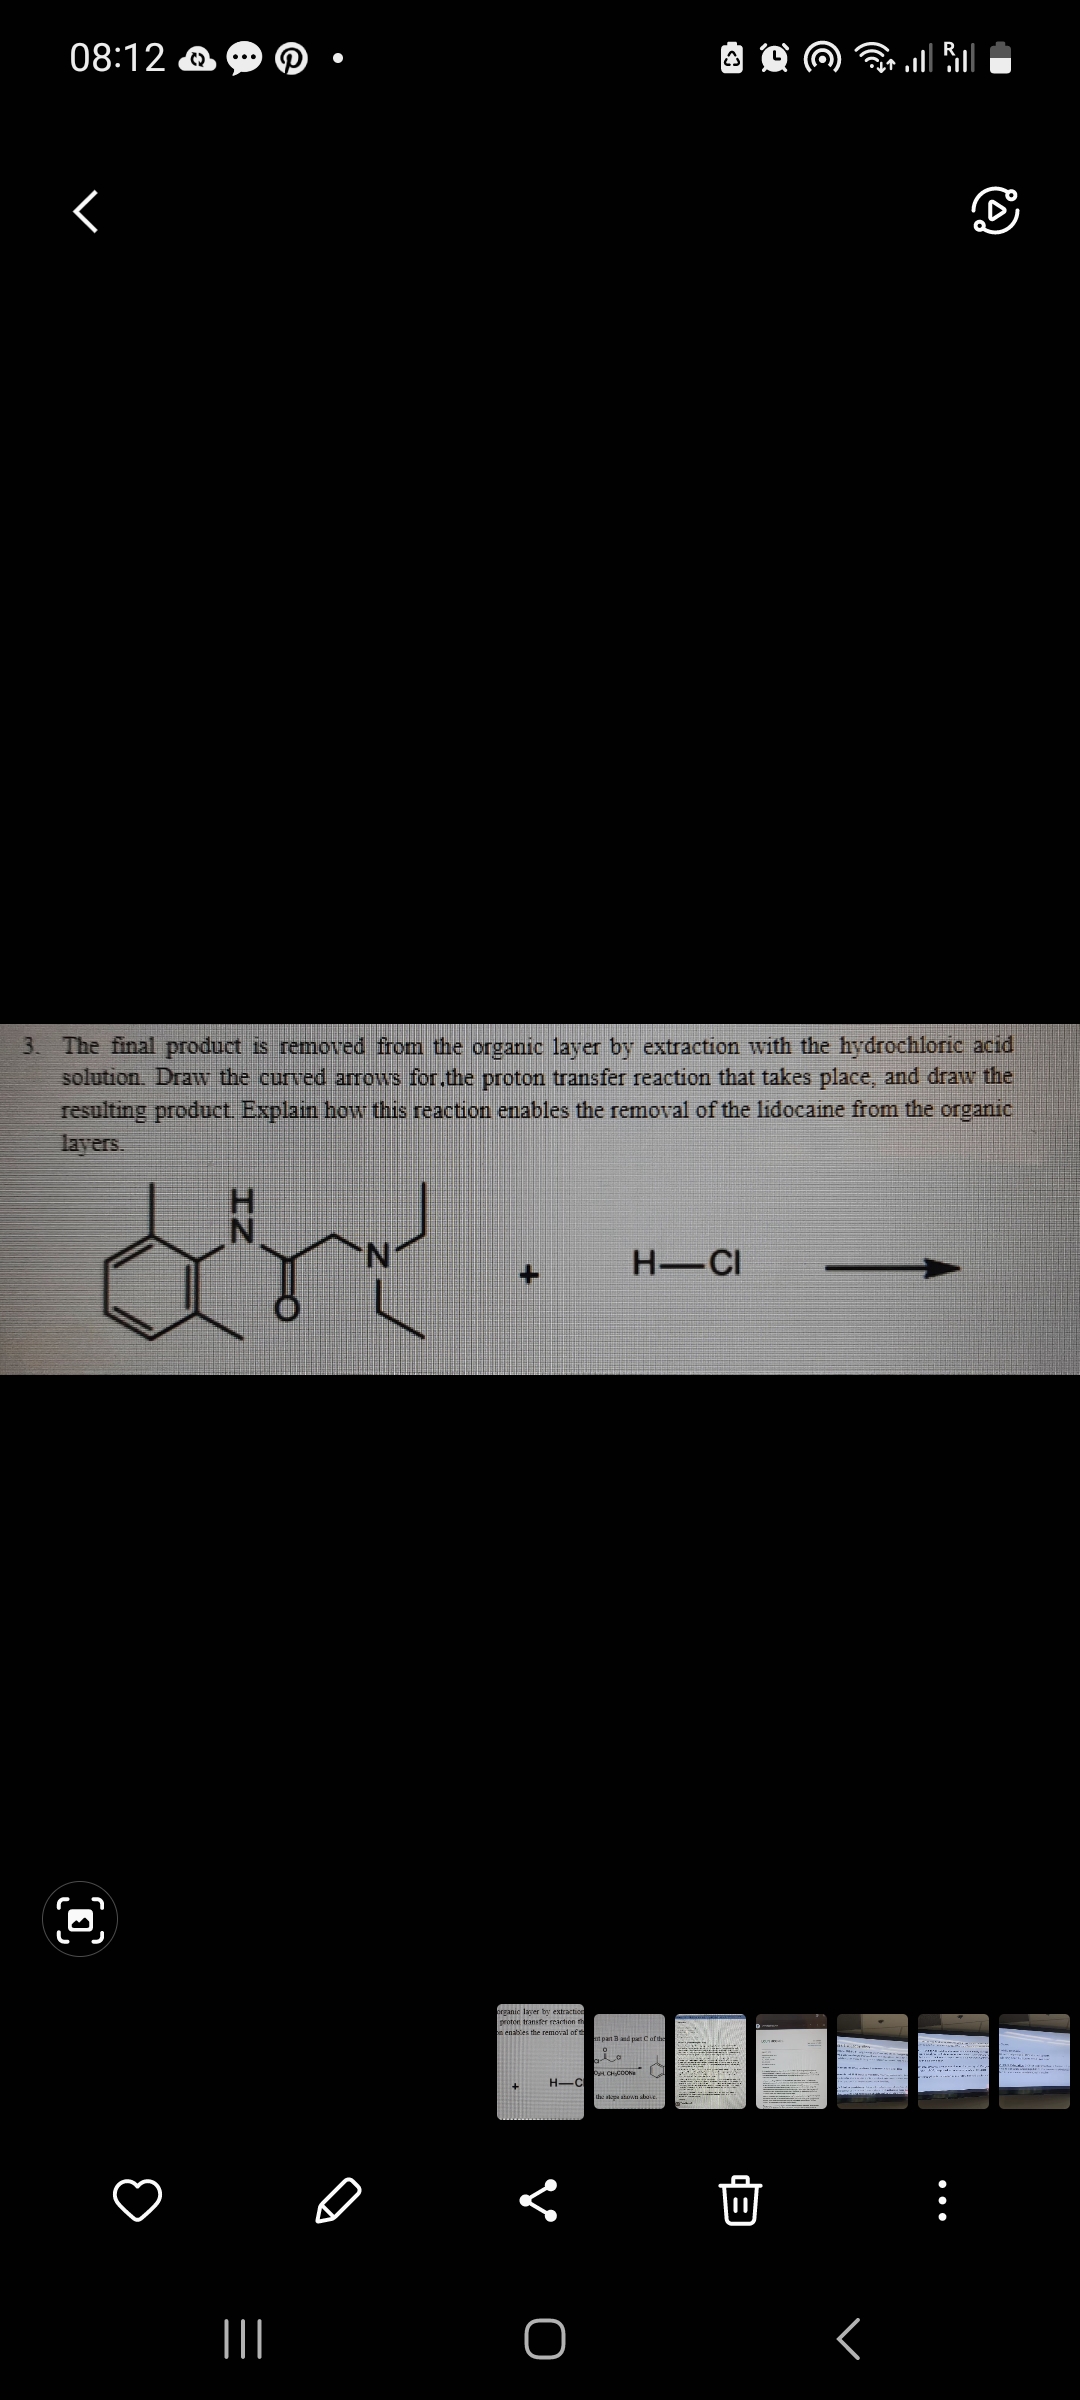 08:12
r
|||
3. The final product is removed from the organic layer by extraction with the hydrochloric acid
solution. Draw the curved arrows for the proton transfer reaction that takes place, and draw the
resulting product. Explain how this reaction enables the removal of the lidocaine from the organic
layers.
dr
organic layer by extraction
proton transfer reaction the
on enables the removal of
of th
H-C
<
O
<3
H-CI
pan 3 and pat C of the
i.
|| |
Peter